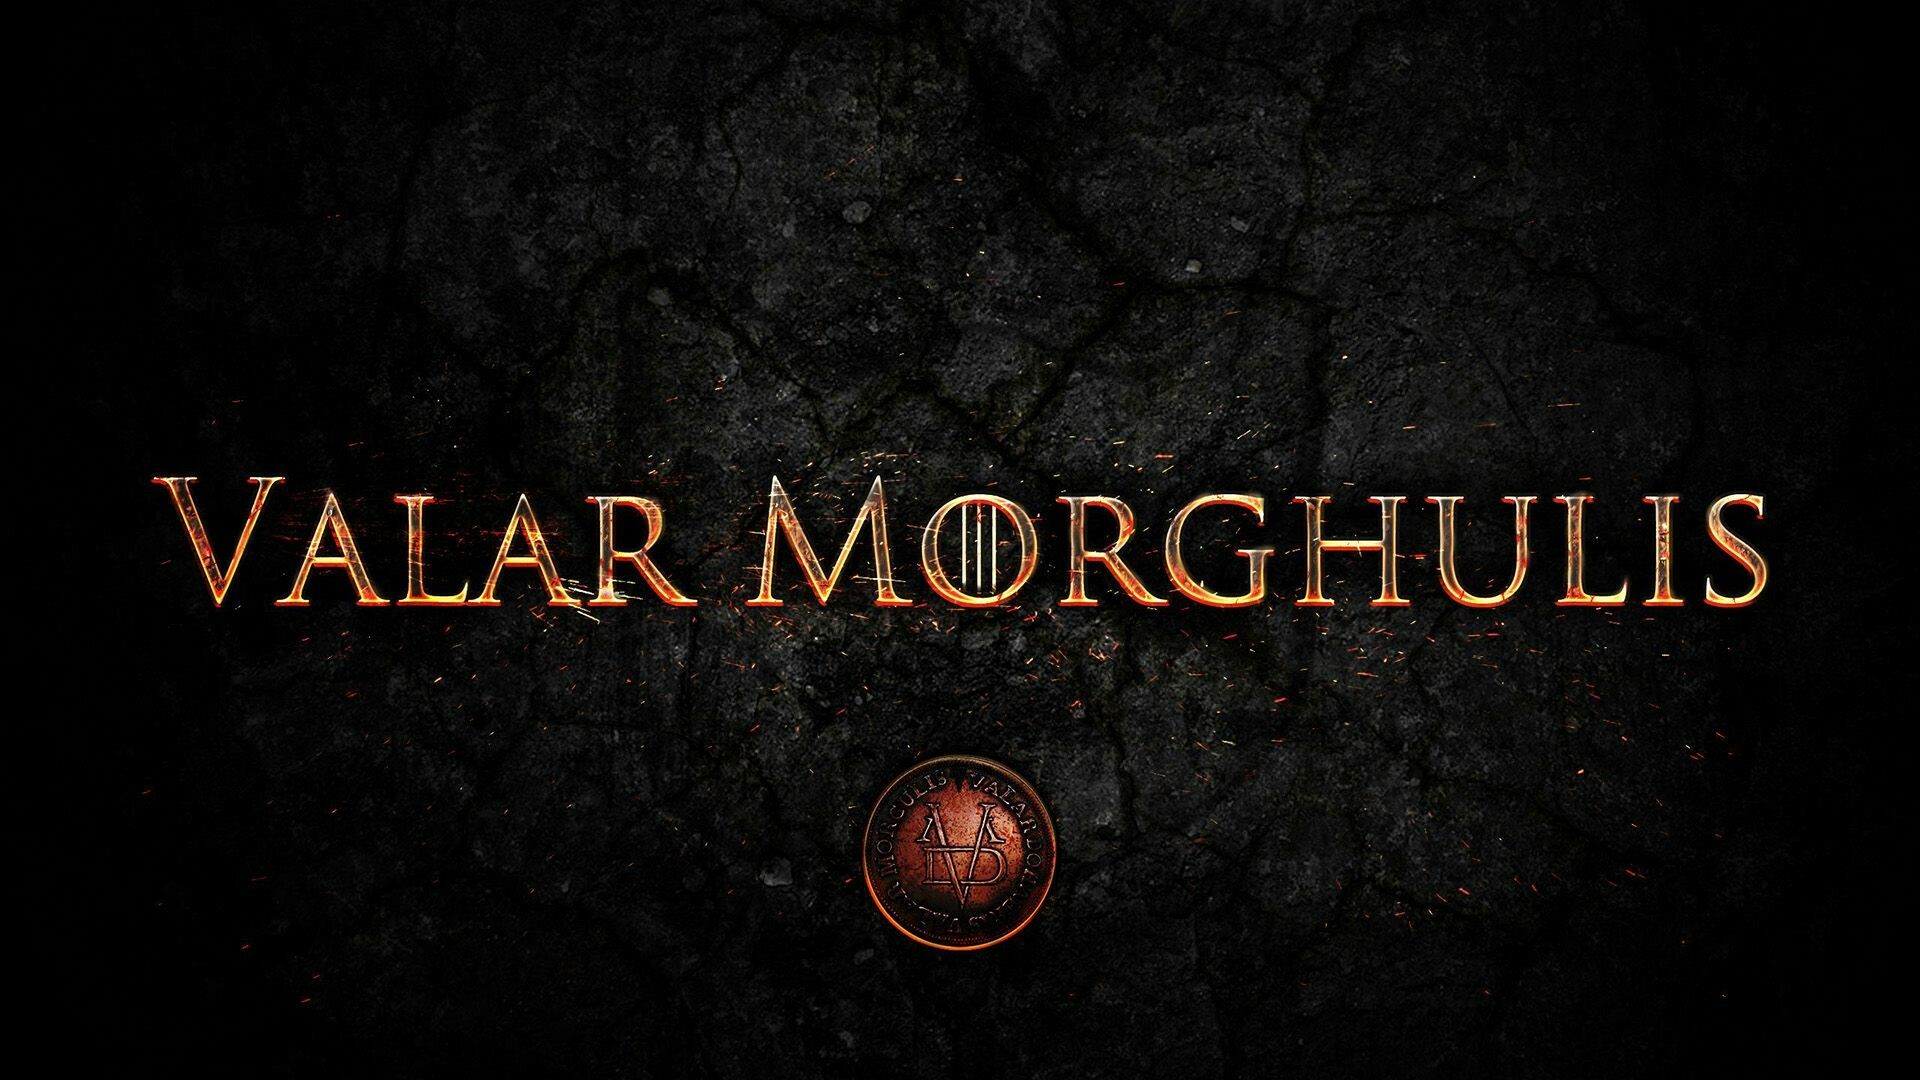 Game of Thrones: Valar Morghulis, Won Primetime Emmy Award for Outstanding Drama Series in 2015. 1920x1080 Full HD Background.